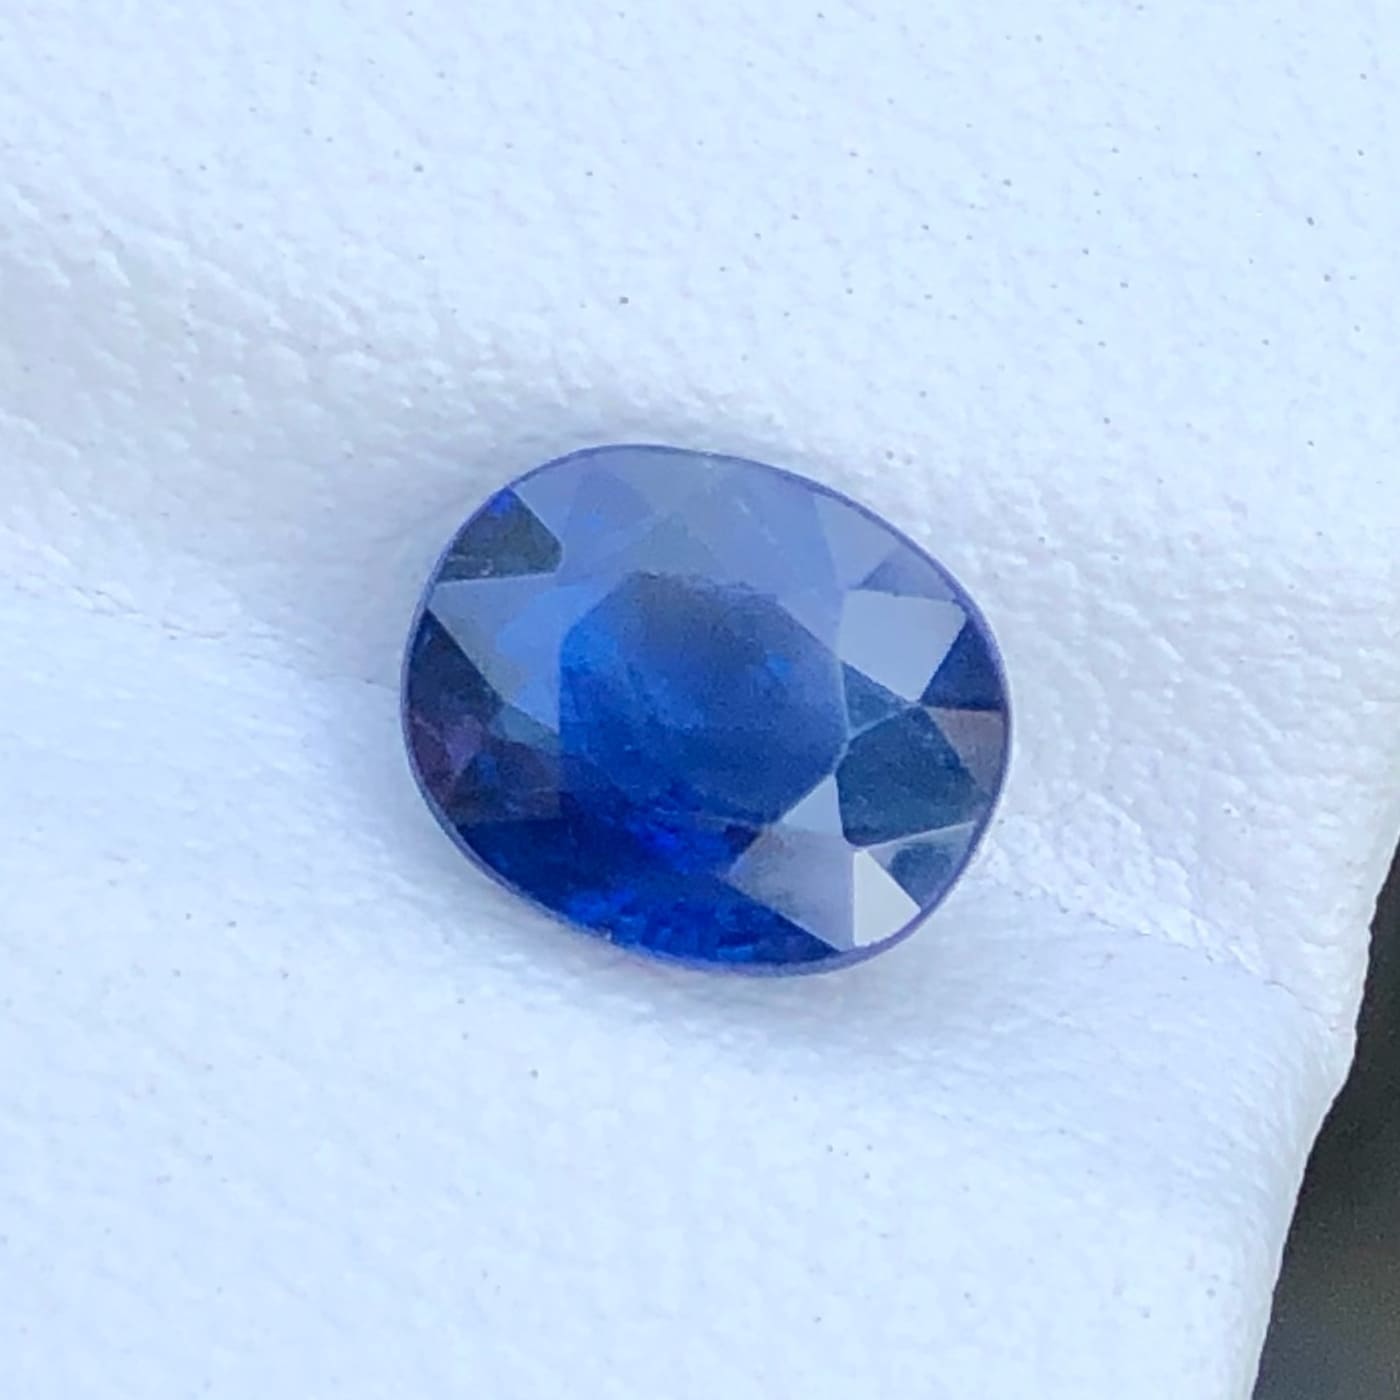 Buy 1.65 Carats Faceted Catalina Blue Sapphire